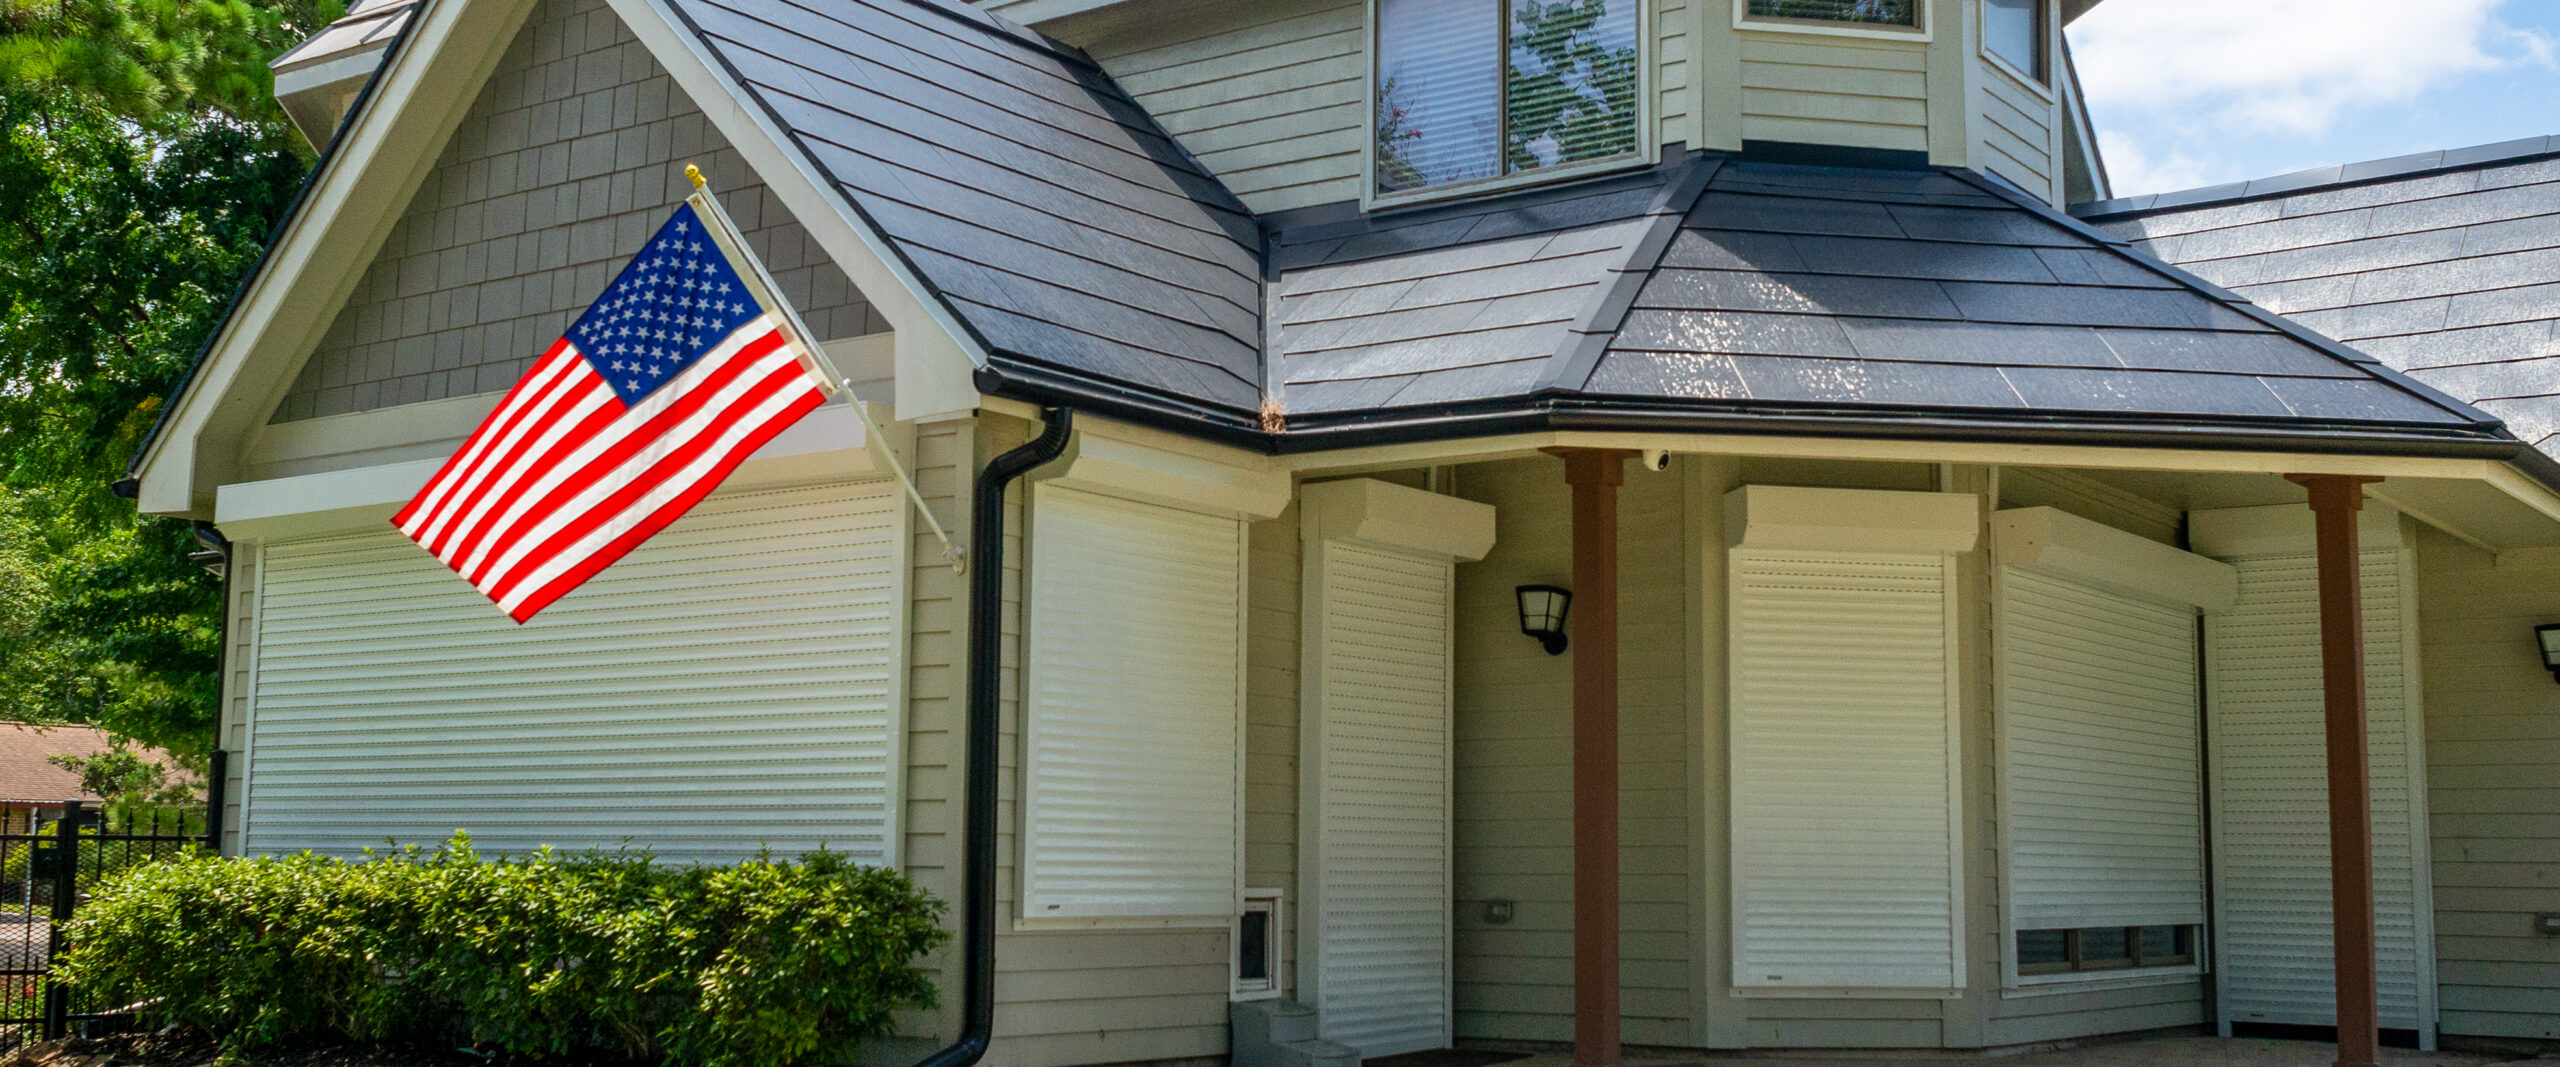 Exterior View of a House with the U.S. Flag and Rolling Shutters Installed at Windows and Doors